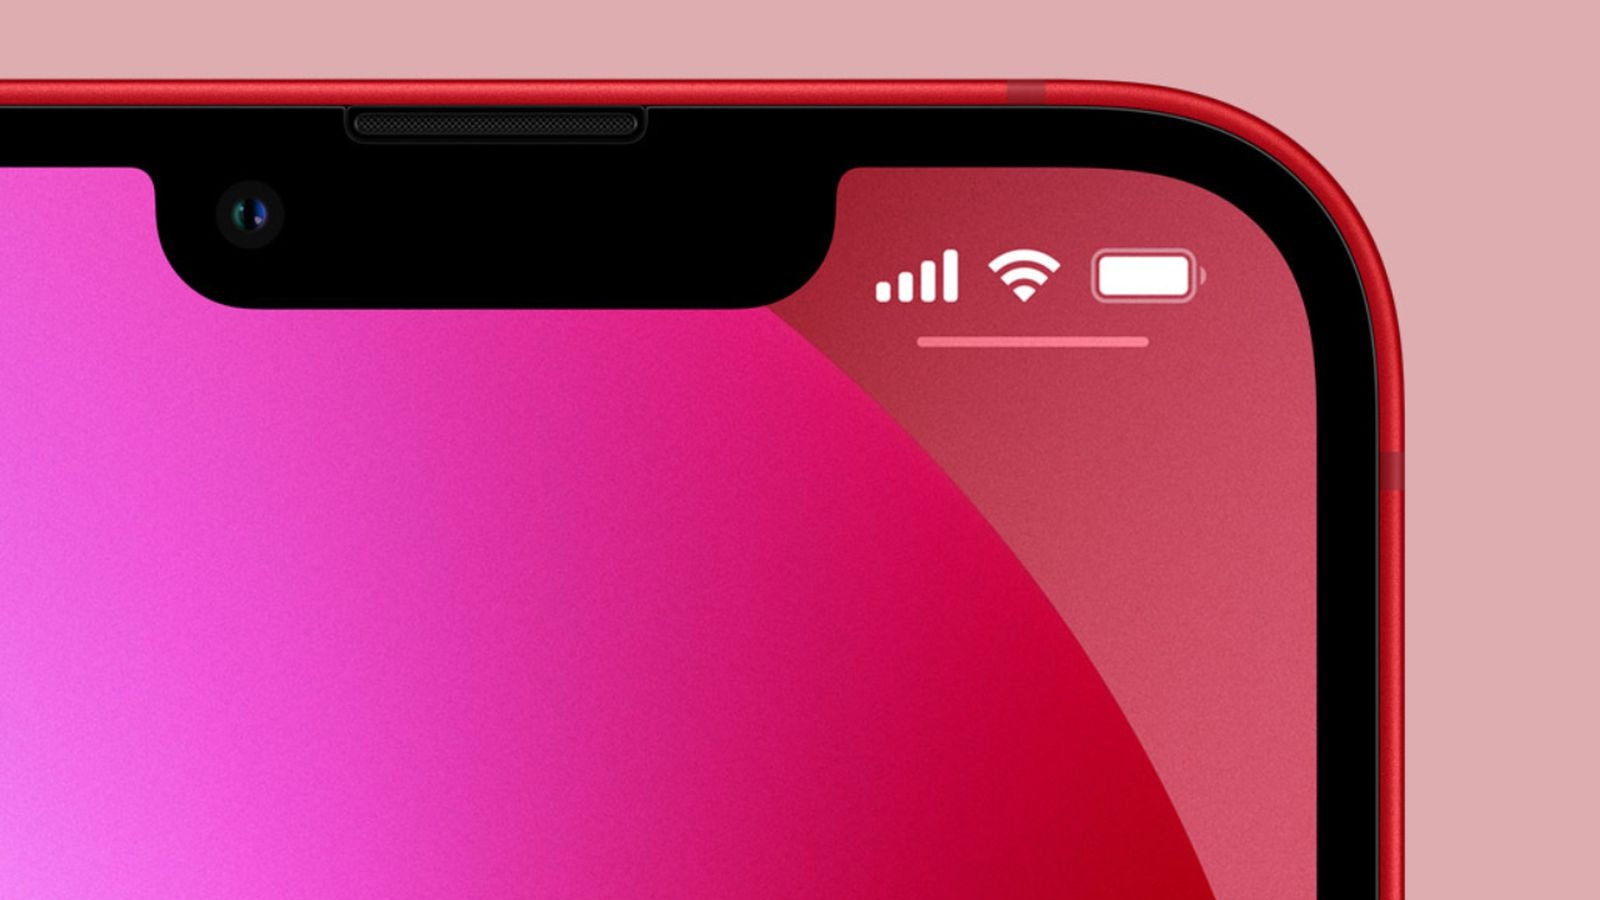 Apple Explored These Notch and Dynamic Island Designs for iPhones